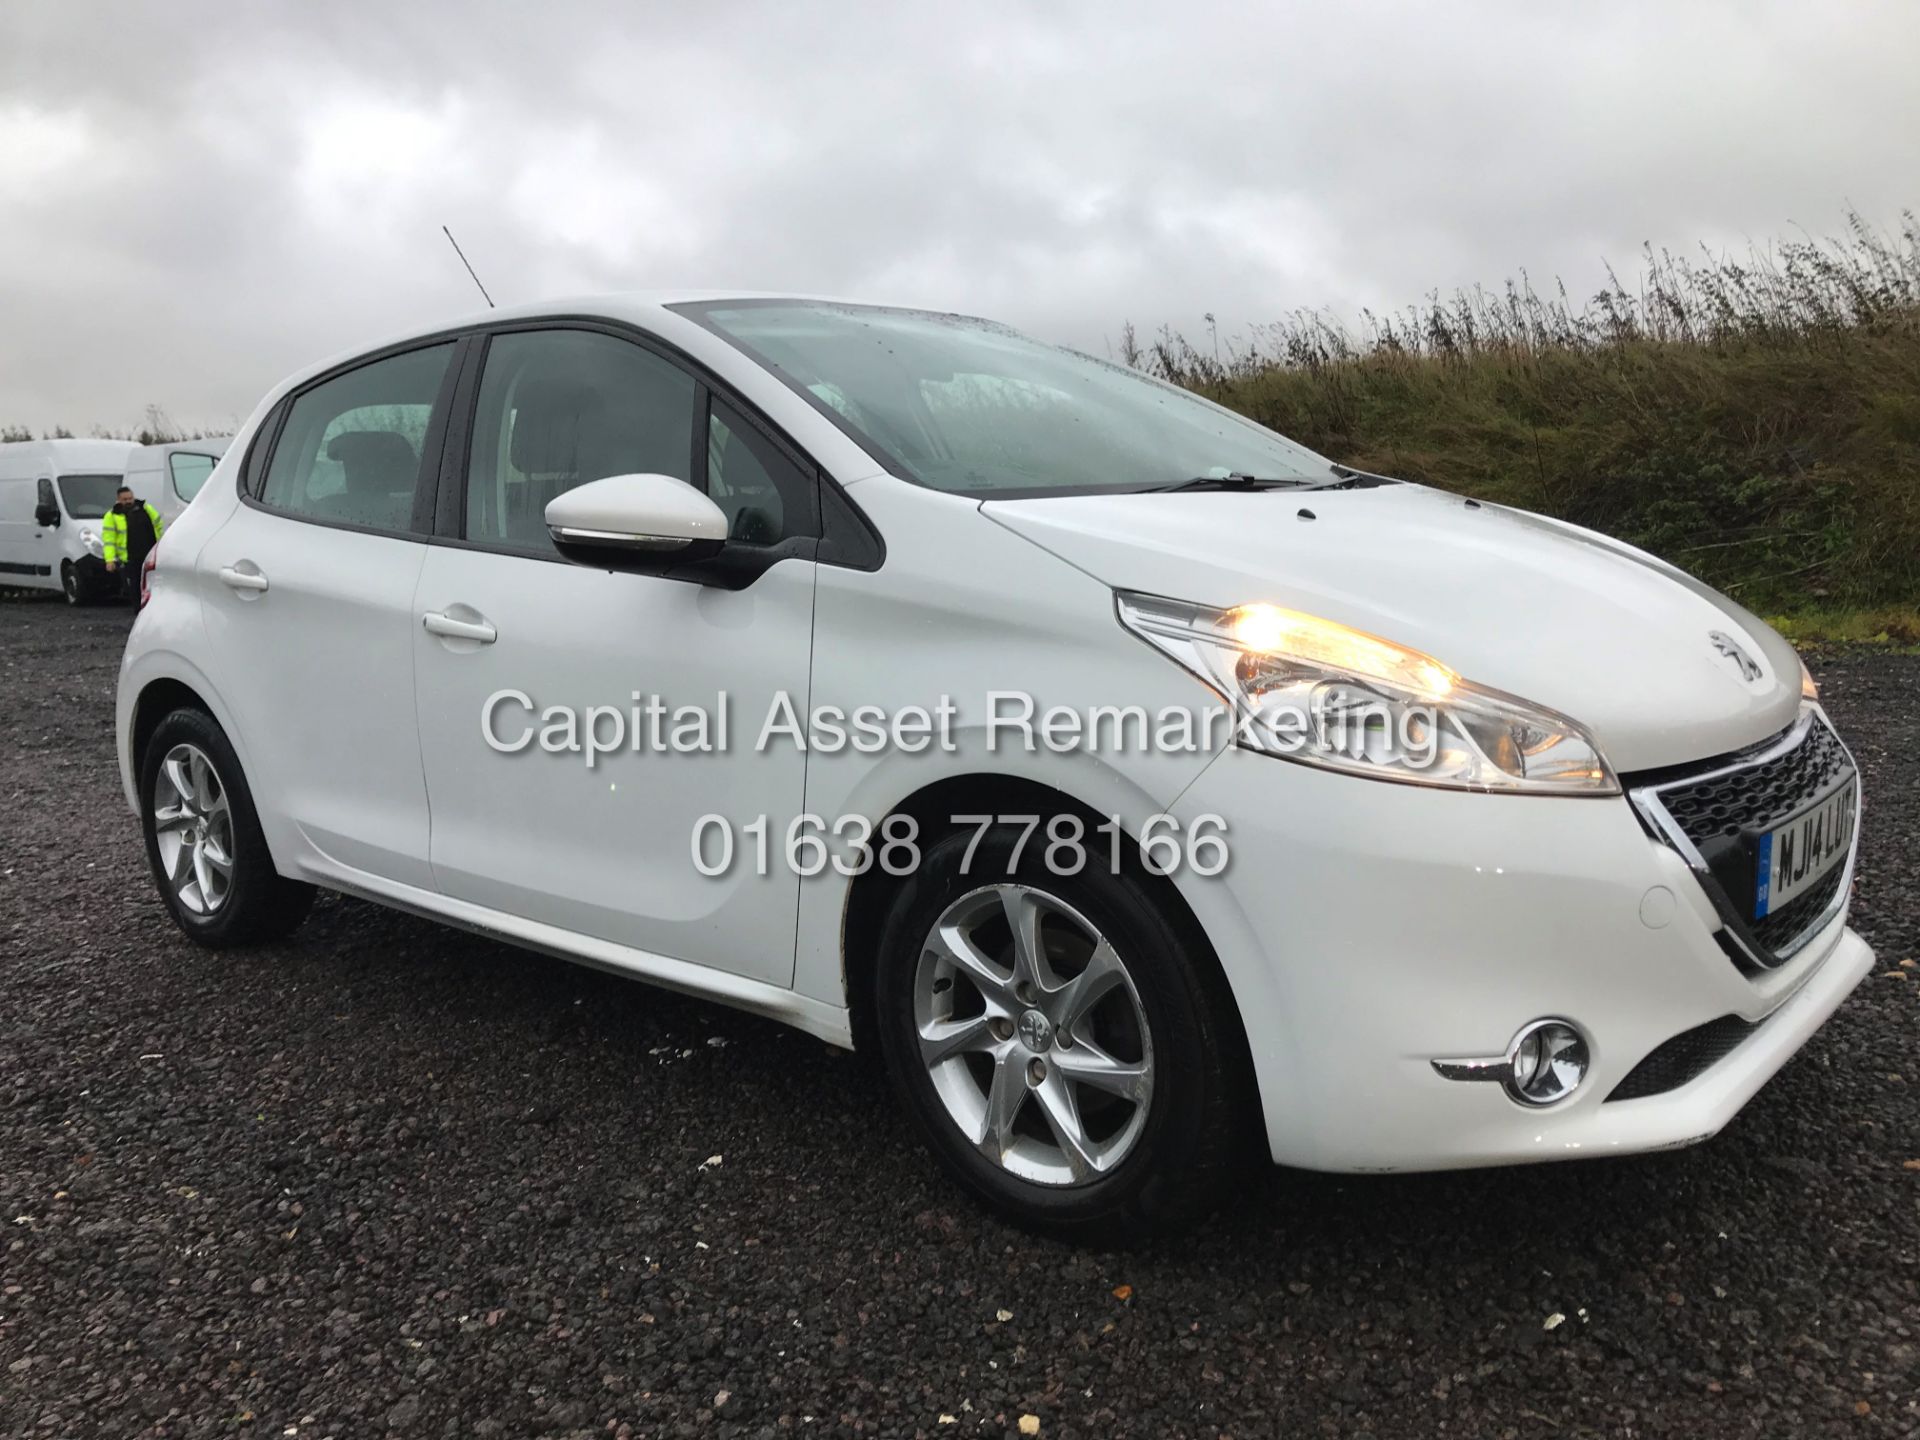 (ON SALE) PEUGEOT 208 1.4HDI "ACTIVE" 1 PREVIOUS KEEPER FSH (14 REG) RECENT SERVICE-AIR CON *NO VAT* - Image 2 of 23